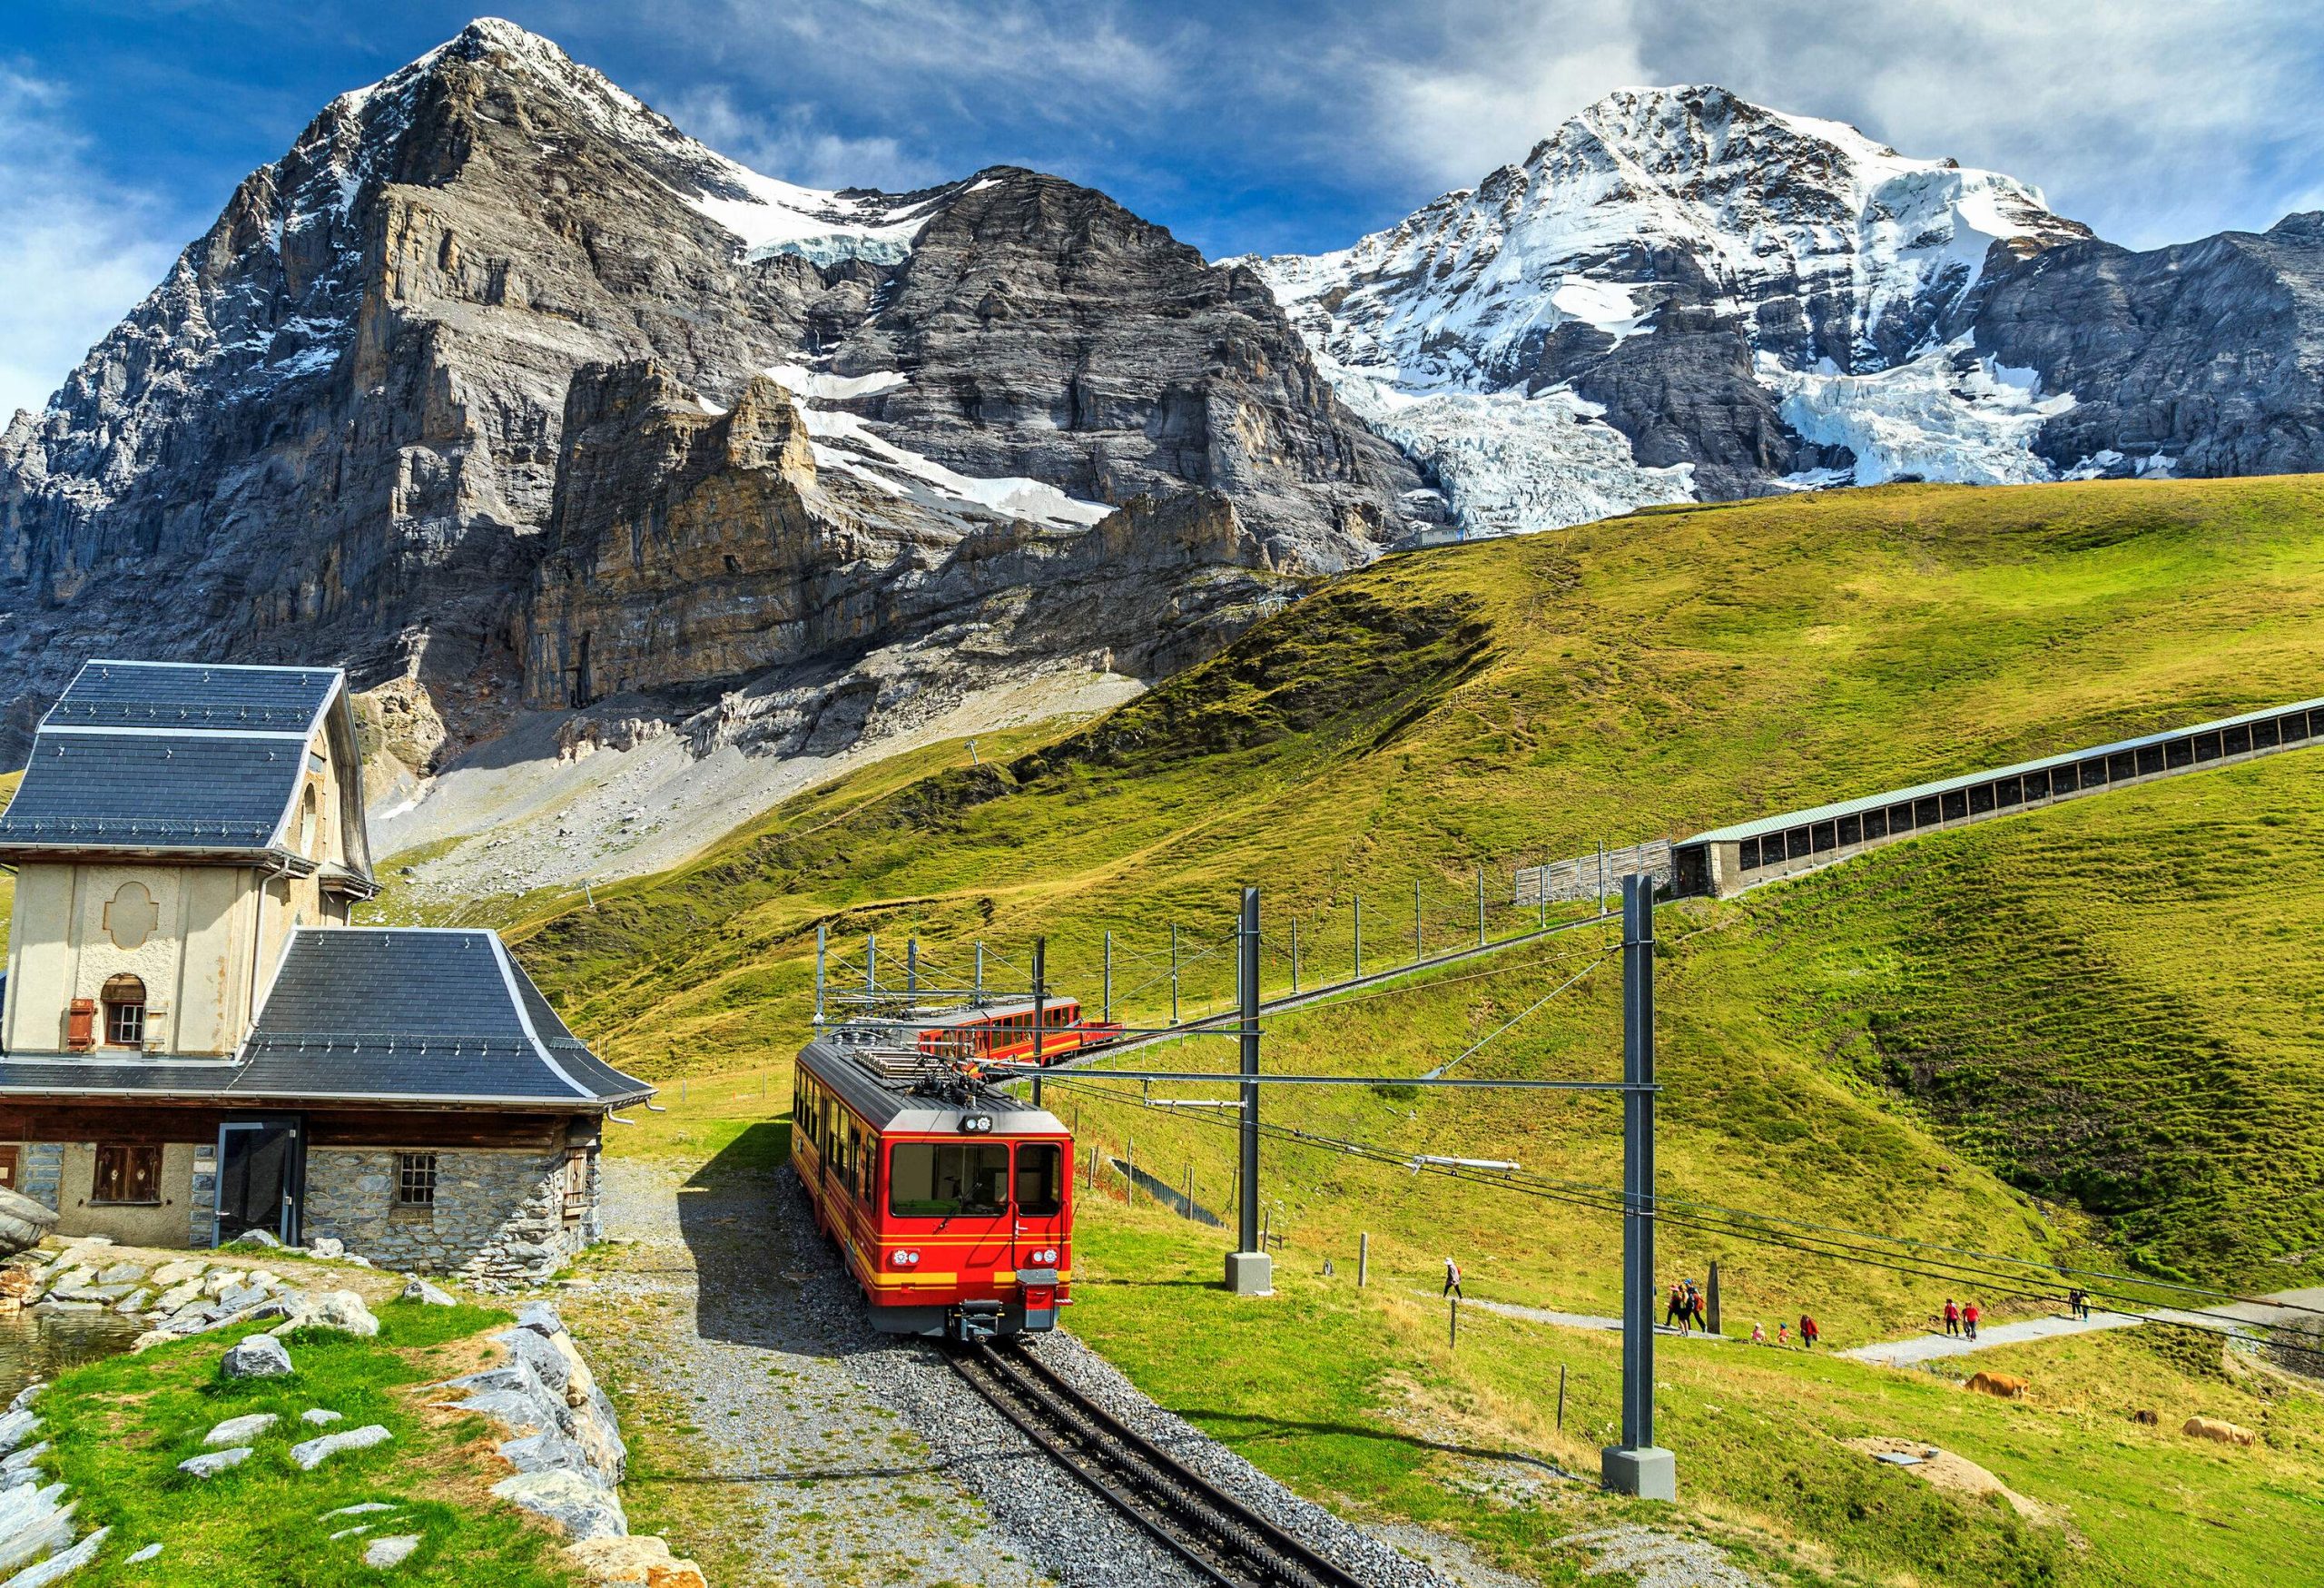 An electric red tourist train winds its way through a verdant landscape, with the imposing presence of rugged mountains forming a dramatic backdrop in the distance.